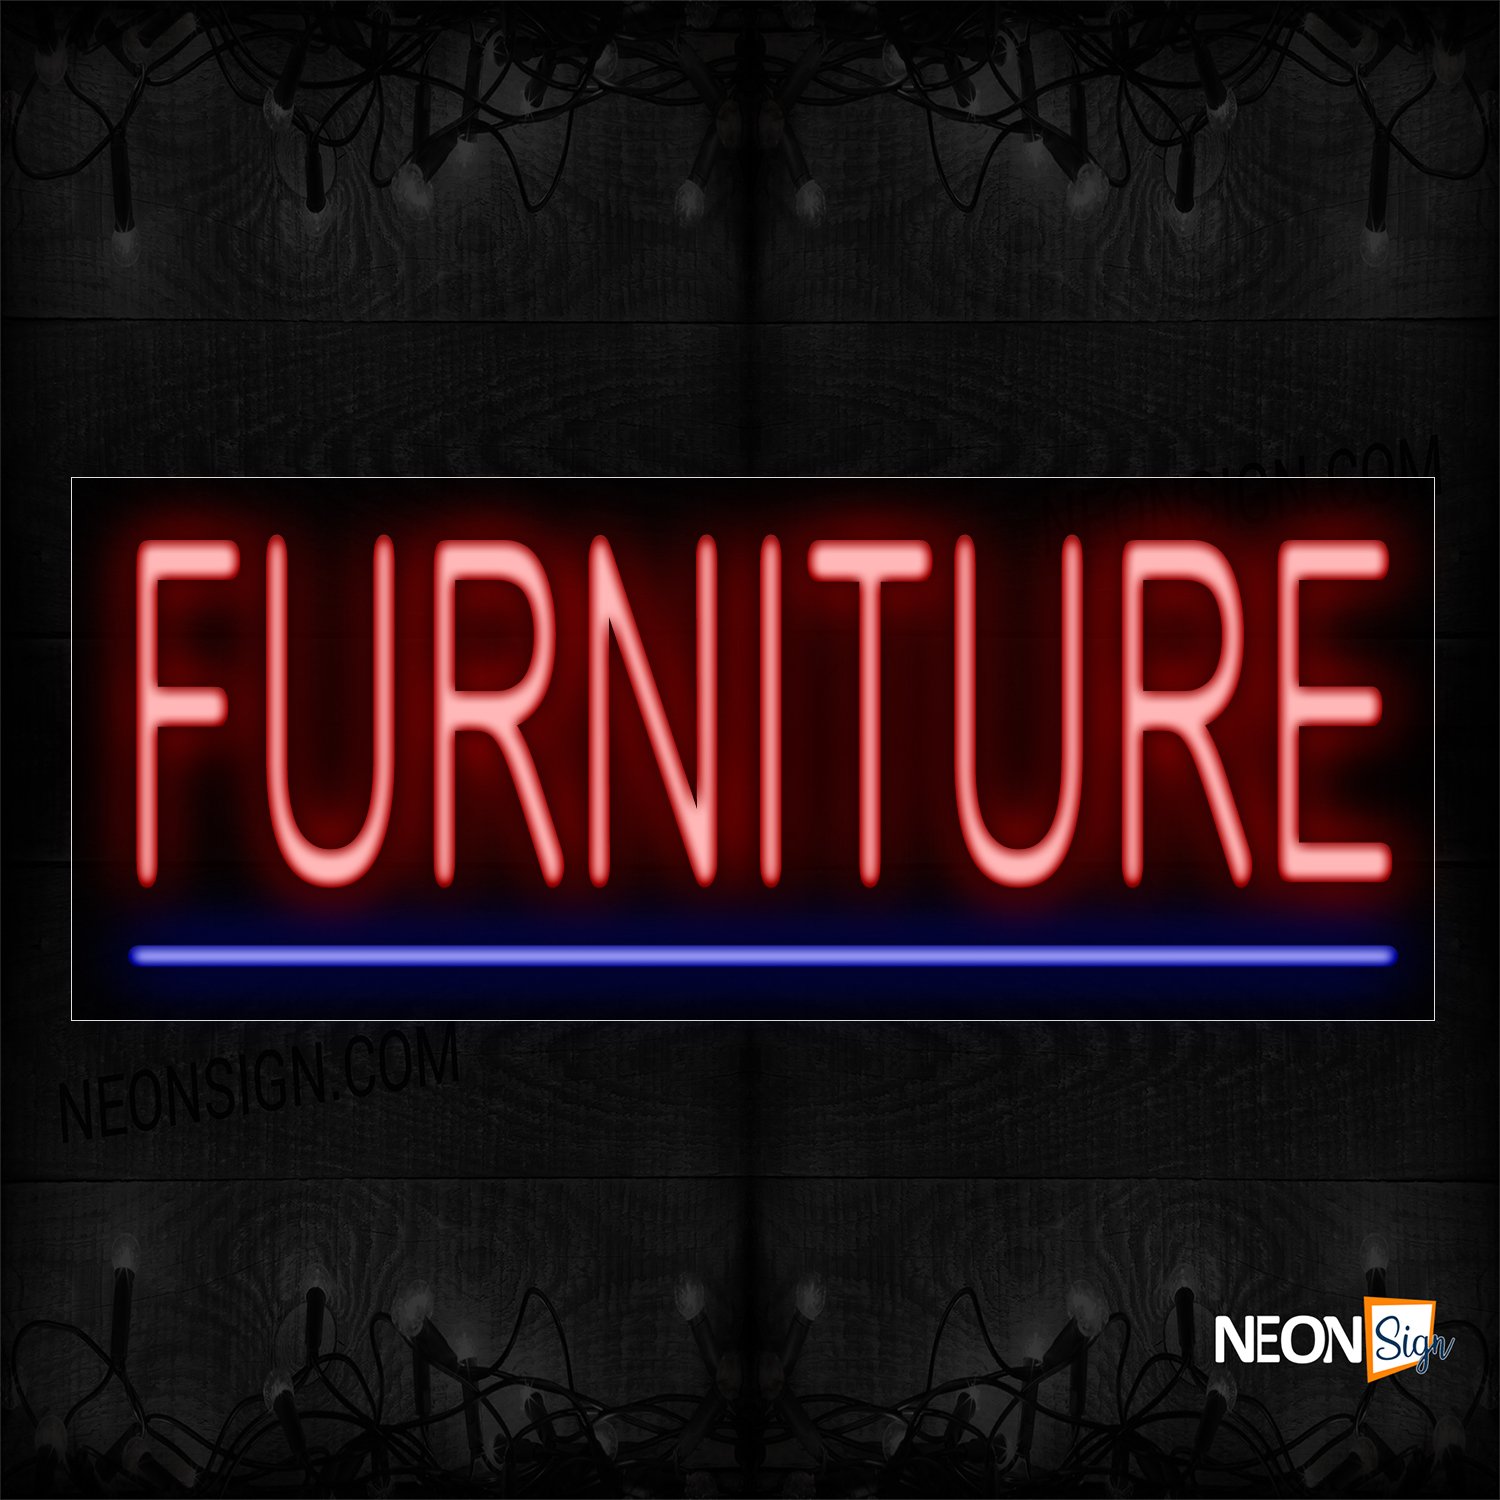 Image of 12066 Furniture With Underline Neon Sign_10x24 Black Backing